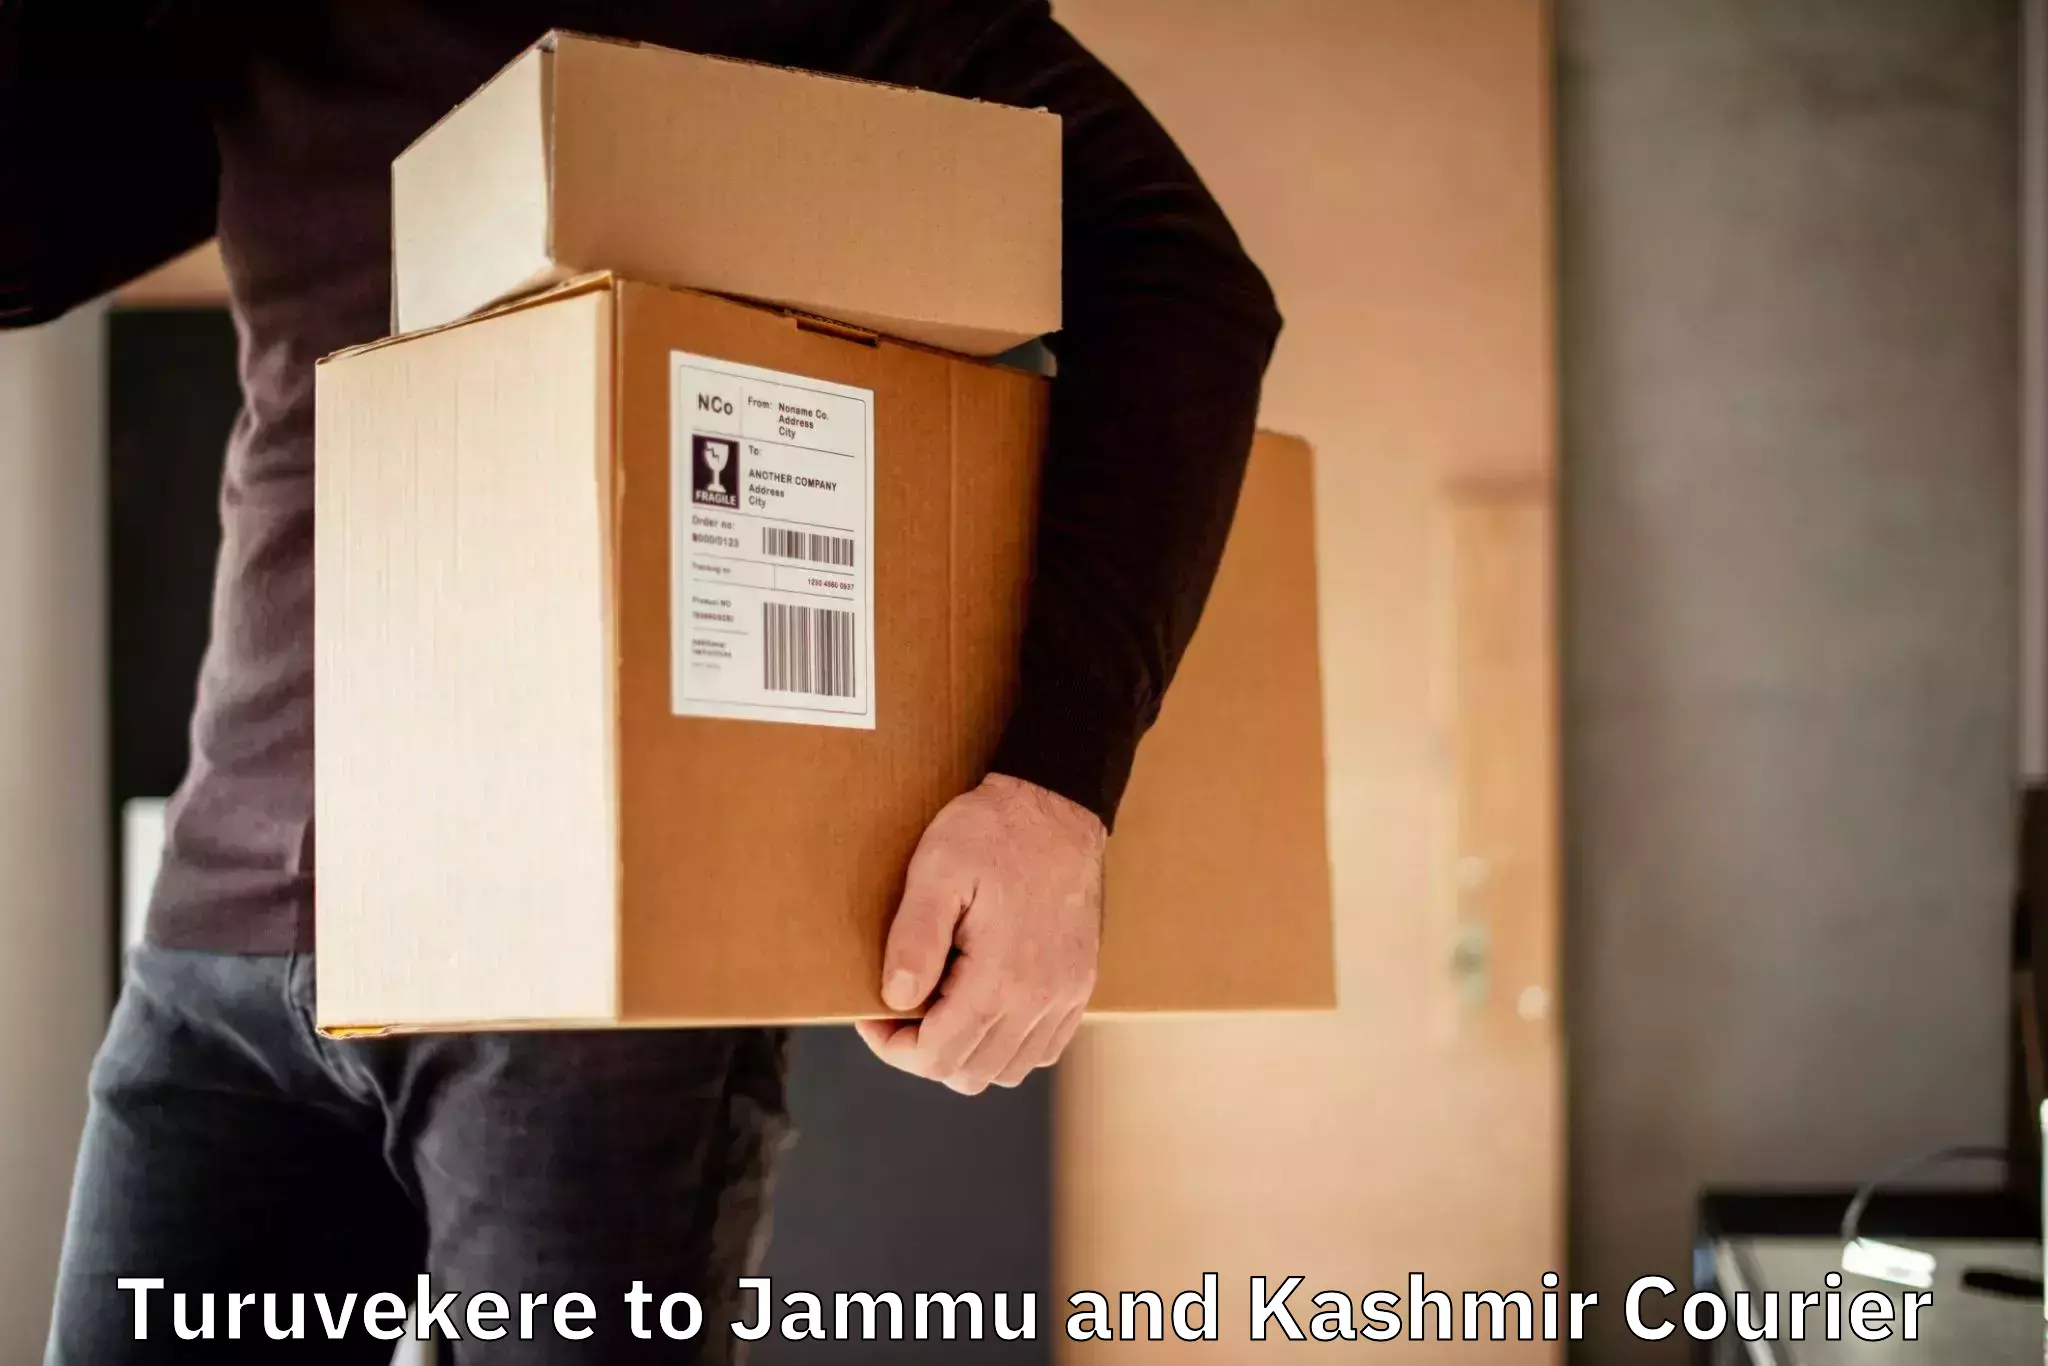 Automated parcel services Turuvekere to University of Jammu